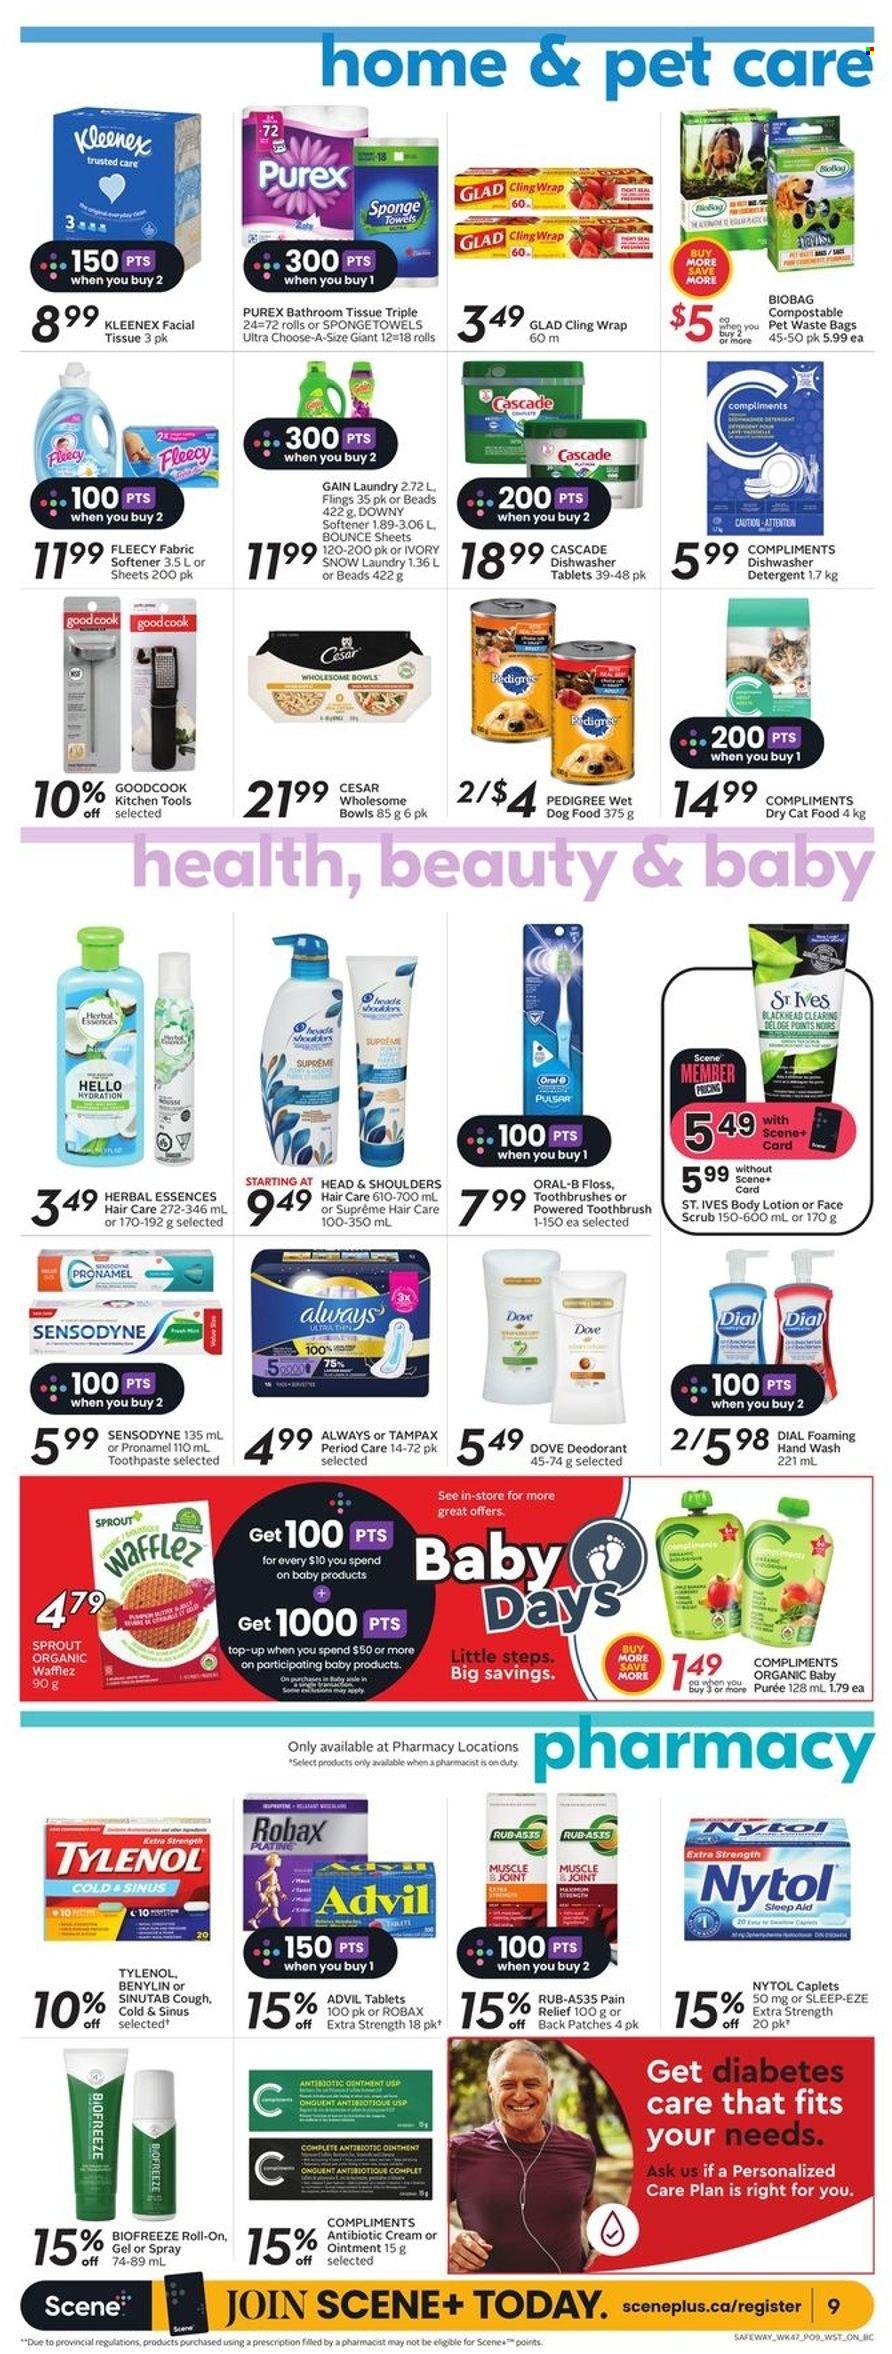 thumbnail - Safeway Flyer - March 23, 2023 - March 29, 2023 - Sales products - Dove, ointment, bath tissue, Kleenex, Gain, fabric softener, Bounce, Cascade, Purex, Downy Laundry, dishwasher cleaner, dishwasher tablets, hand wash, Dial, toothbrush, toothpaste, Head & Shoulders, Herbal Essences, body lotion, anti-perspirant, roll-on, bag, trash bags, animal food, cat food, dog food, wet dog food, Pedigree, dry cat food, pain relief, magnesium, Tylenol, Advil Rapid, Benylin, detergent, Tampax, Oral-B, Sensodyne, deodorant. Page 17.